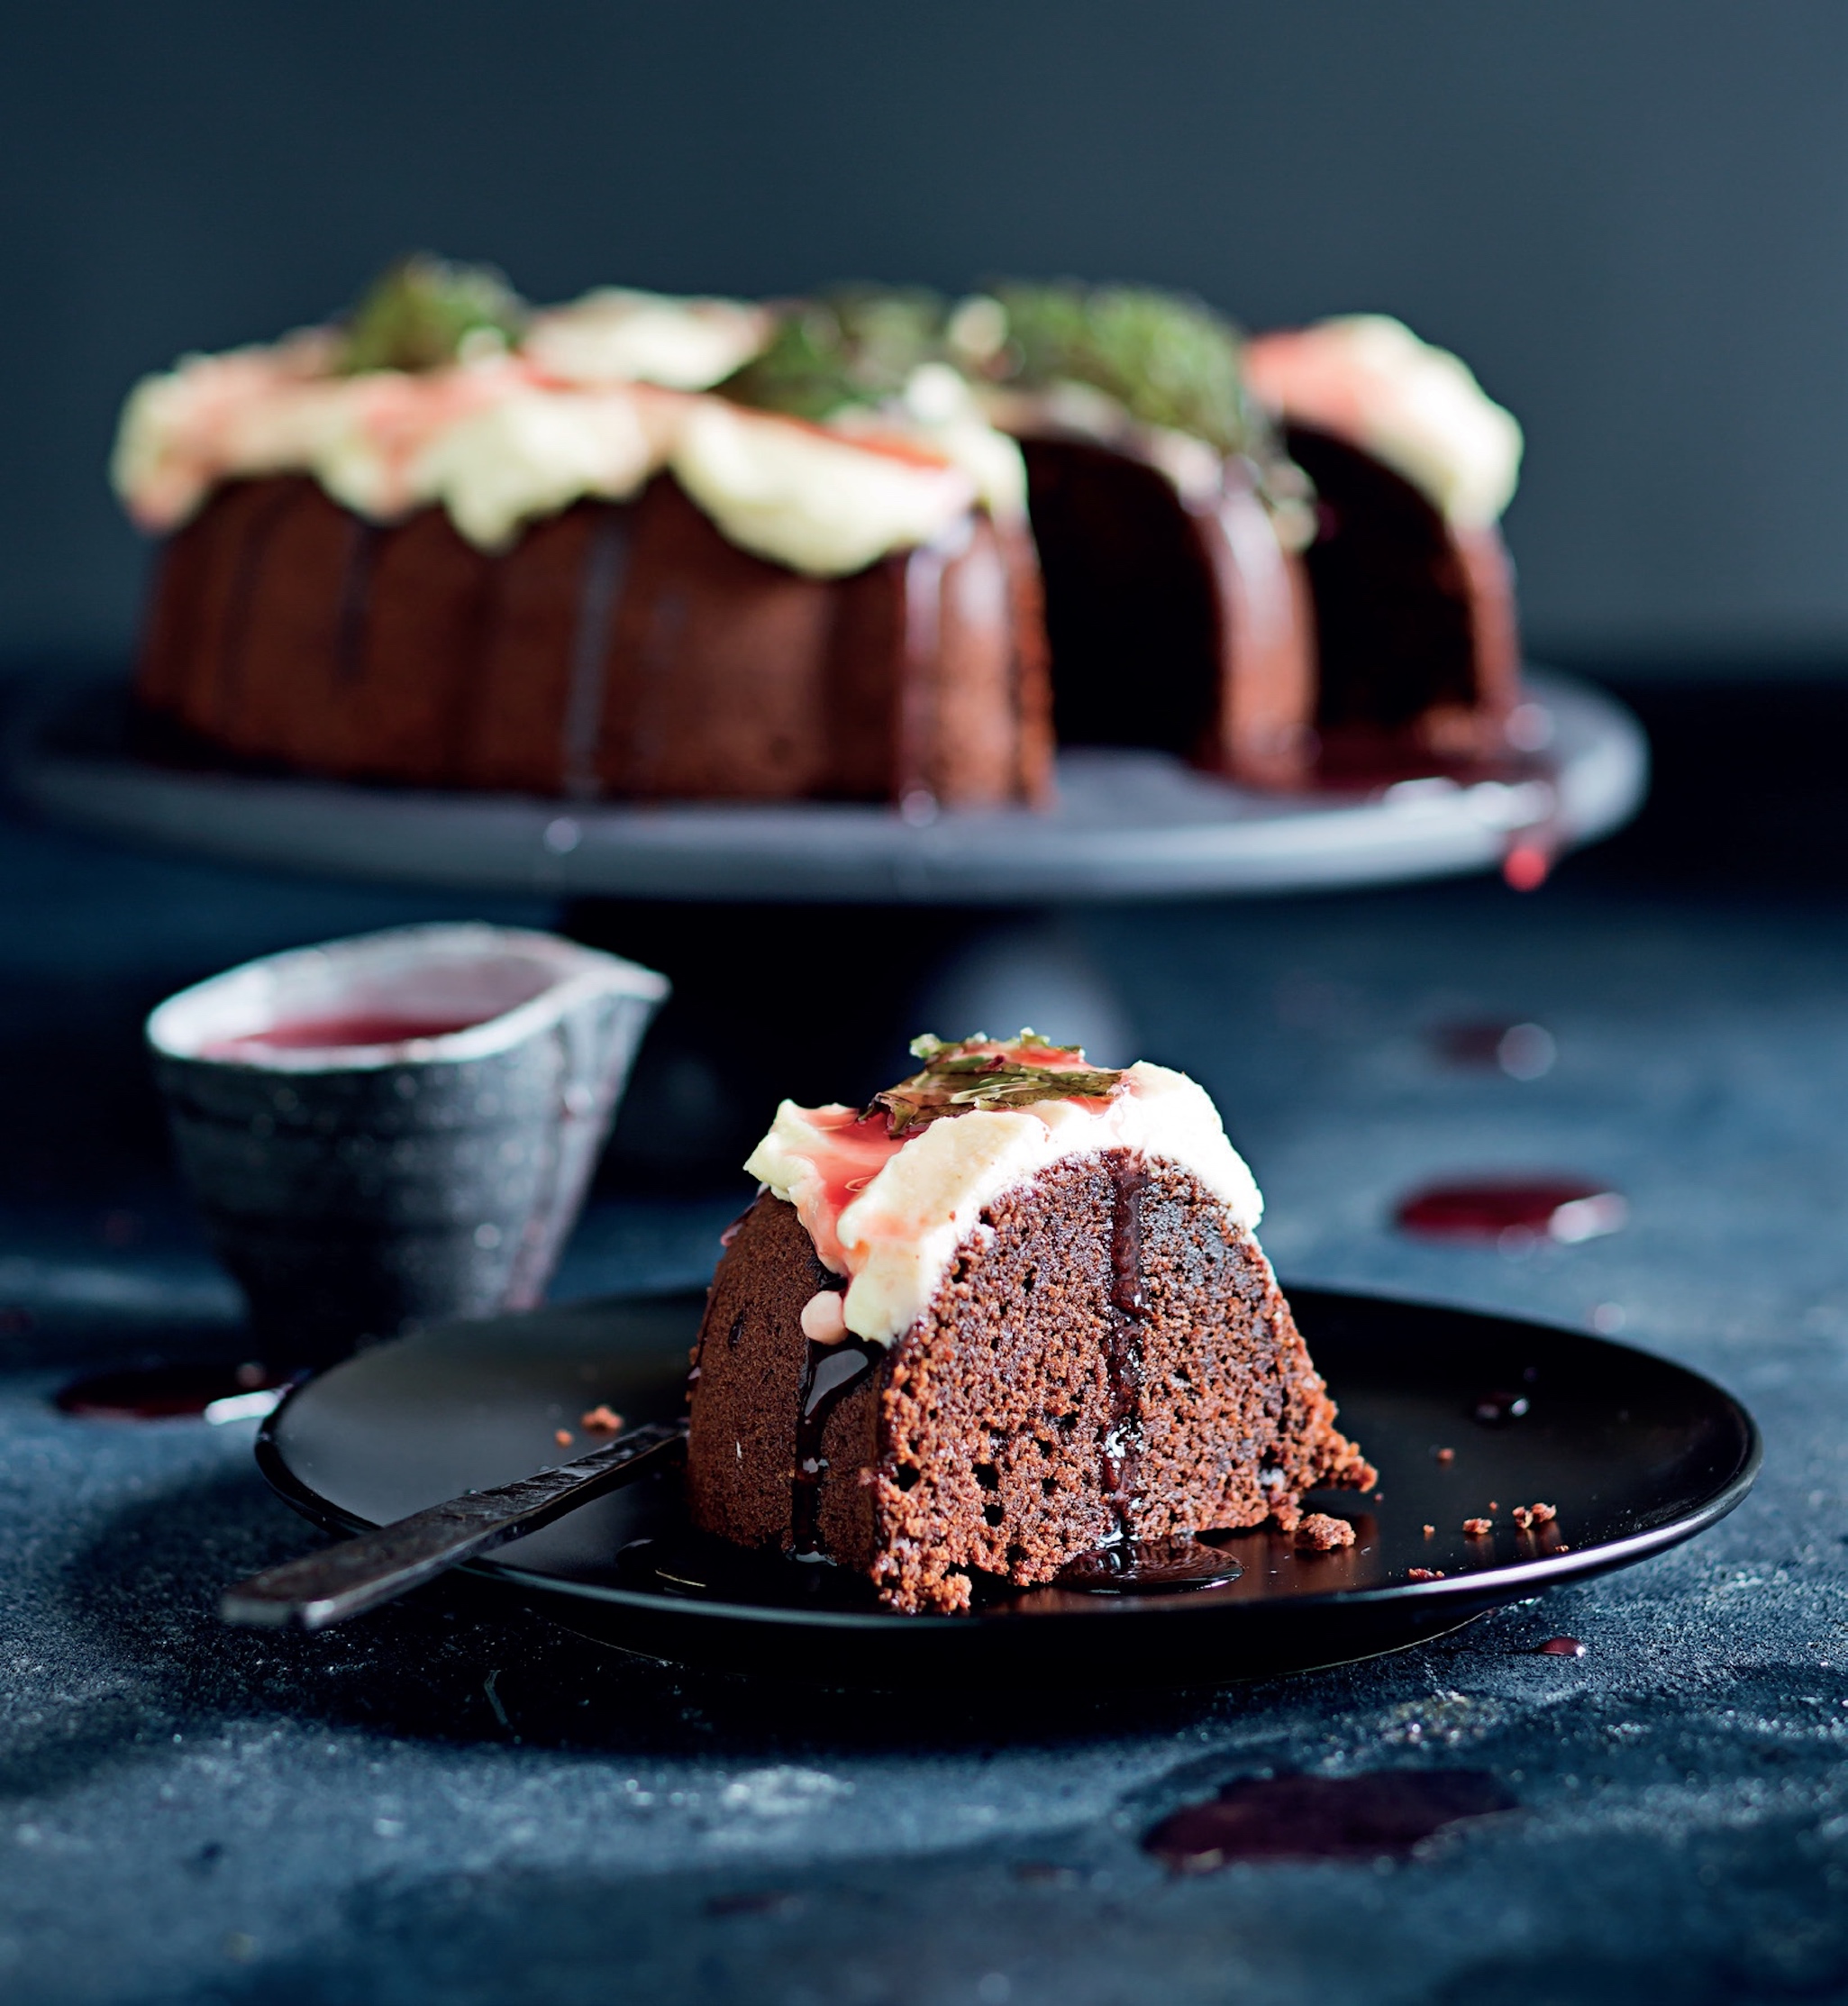 You are currently viewing Chocolate beetroot cake with candied beetroot leaves